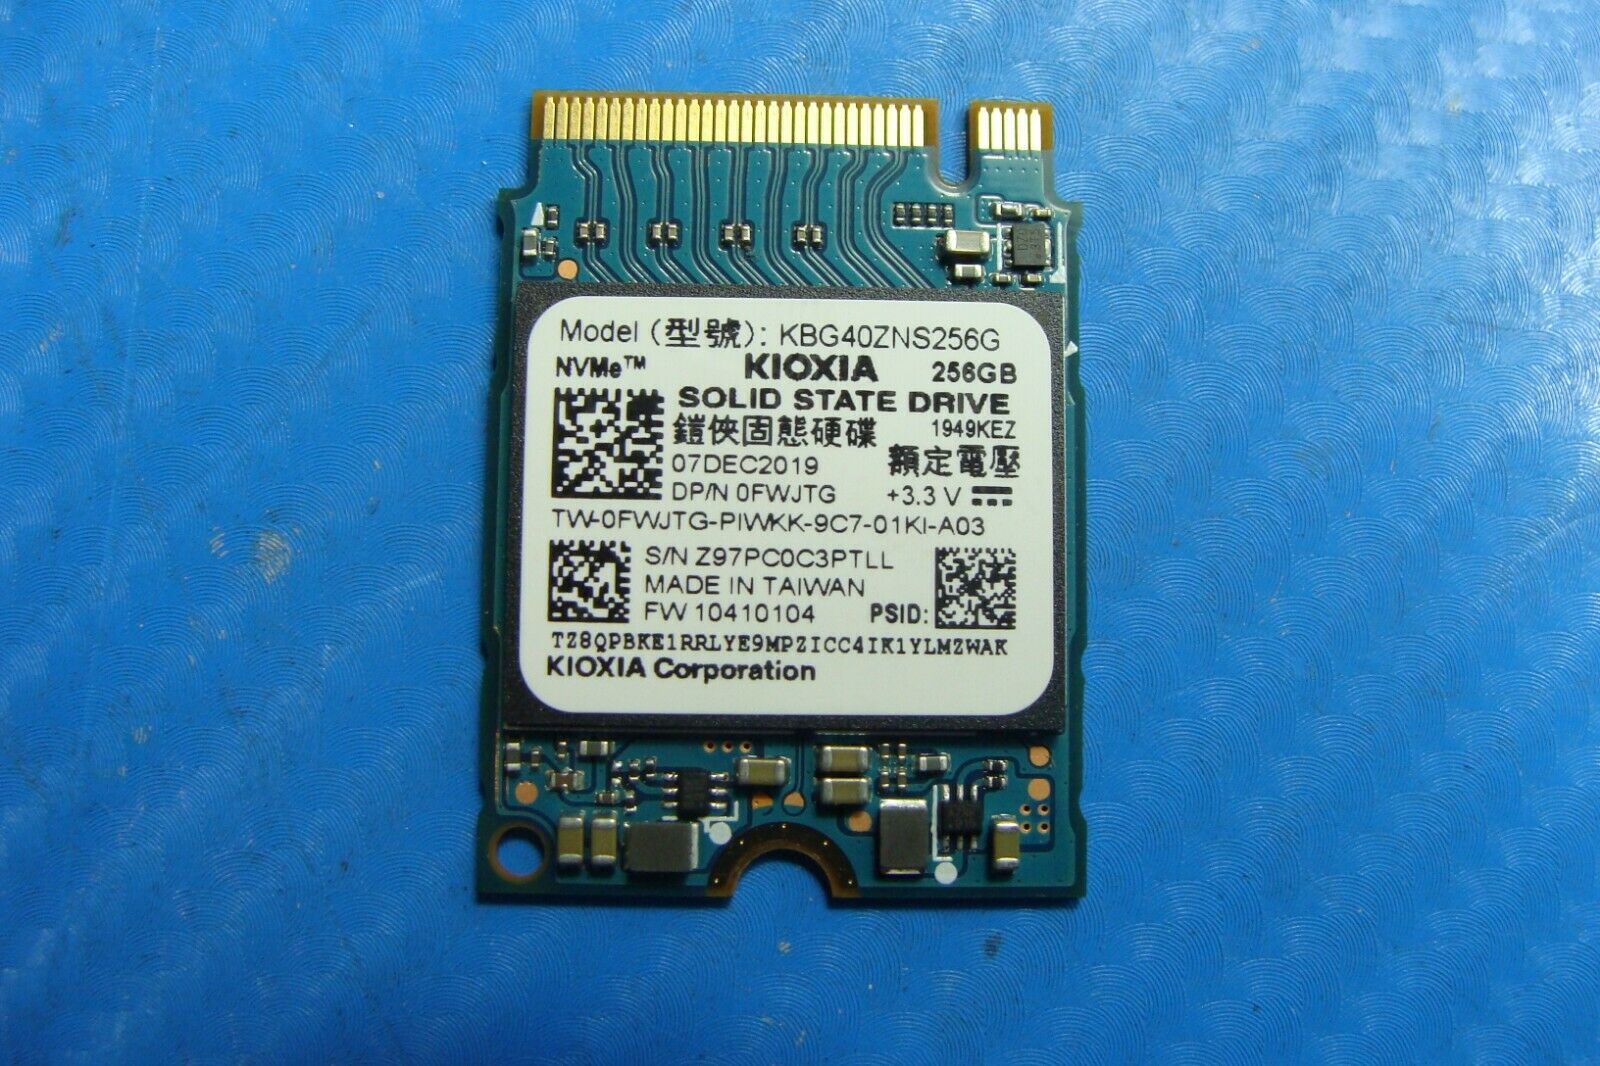 Dell 5591 Kioxia 256GB NVMe M.2 SSD Solid State Drive kbg40zns256g fwjtg 